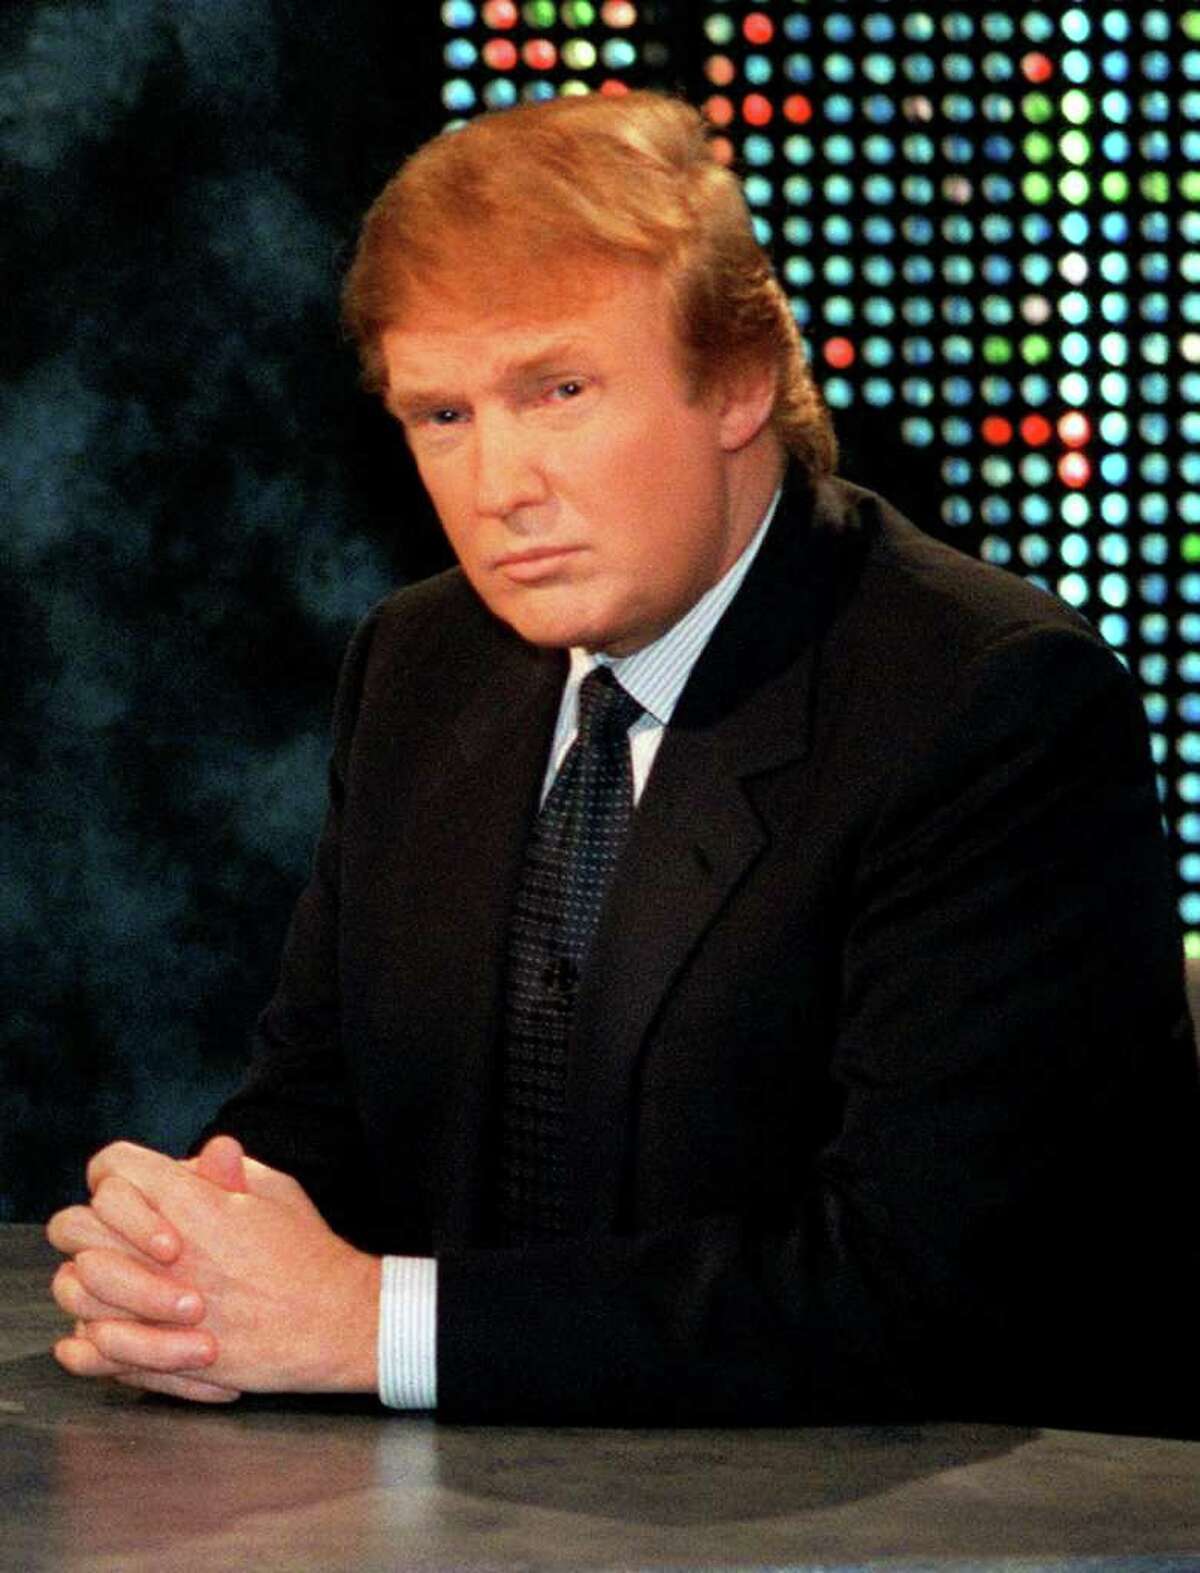 Donald Trump waits to be interviewed by talk show host Larry King during a taping of "Larry King Live," Thursday, Oct, 7, 1999, in New York. Trump said he has formed an exploratory committee to help him determine whether he can win the White House as a Reform Party candidate.